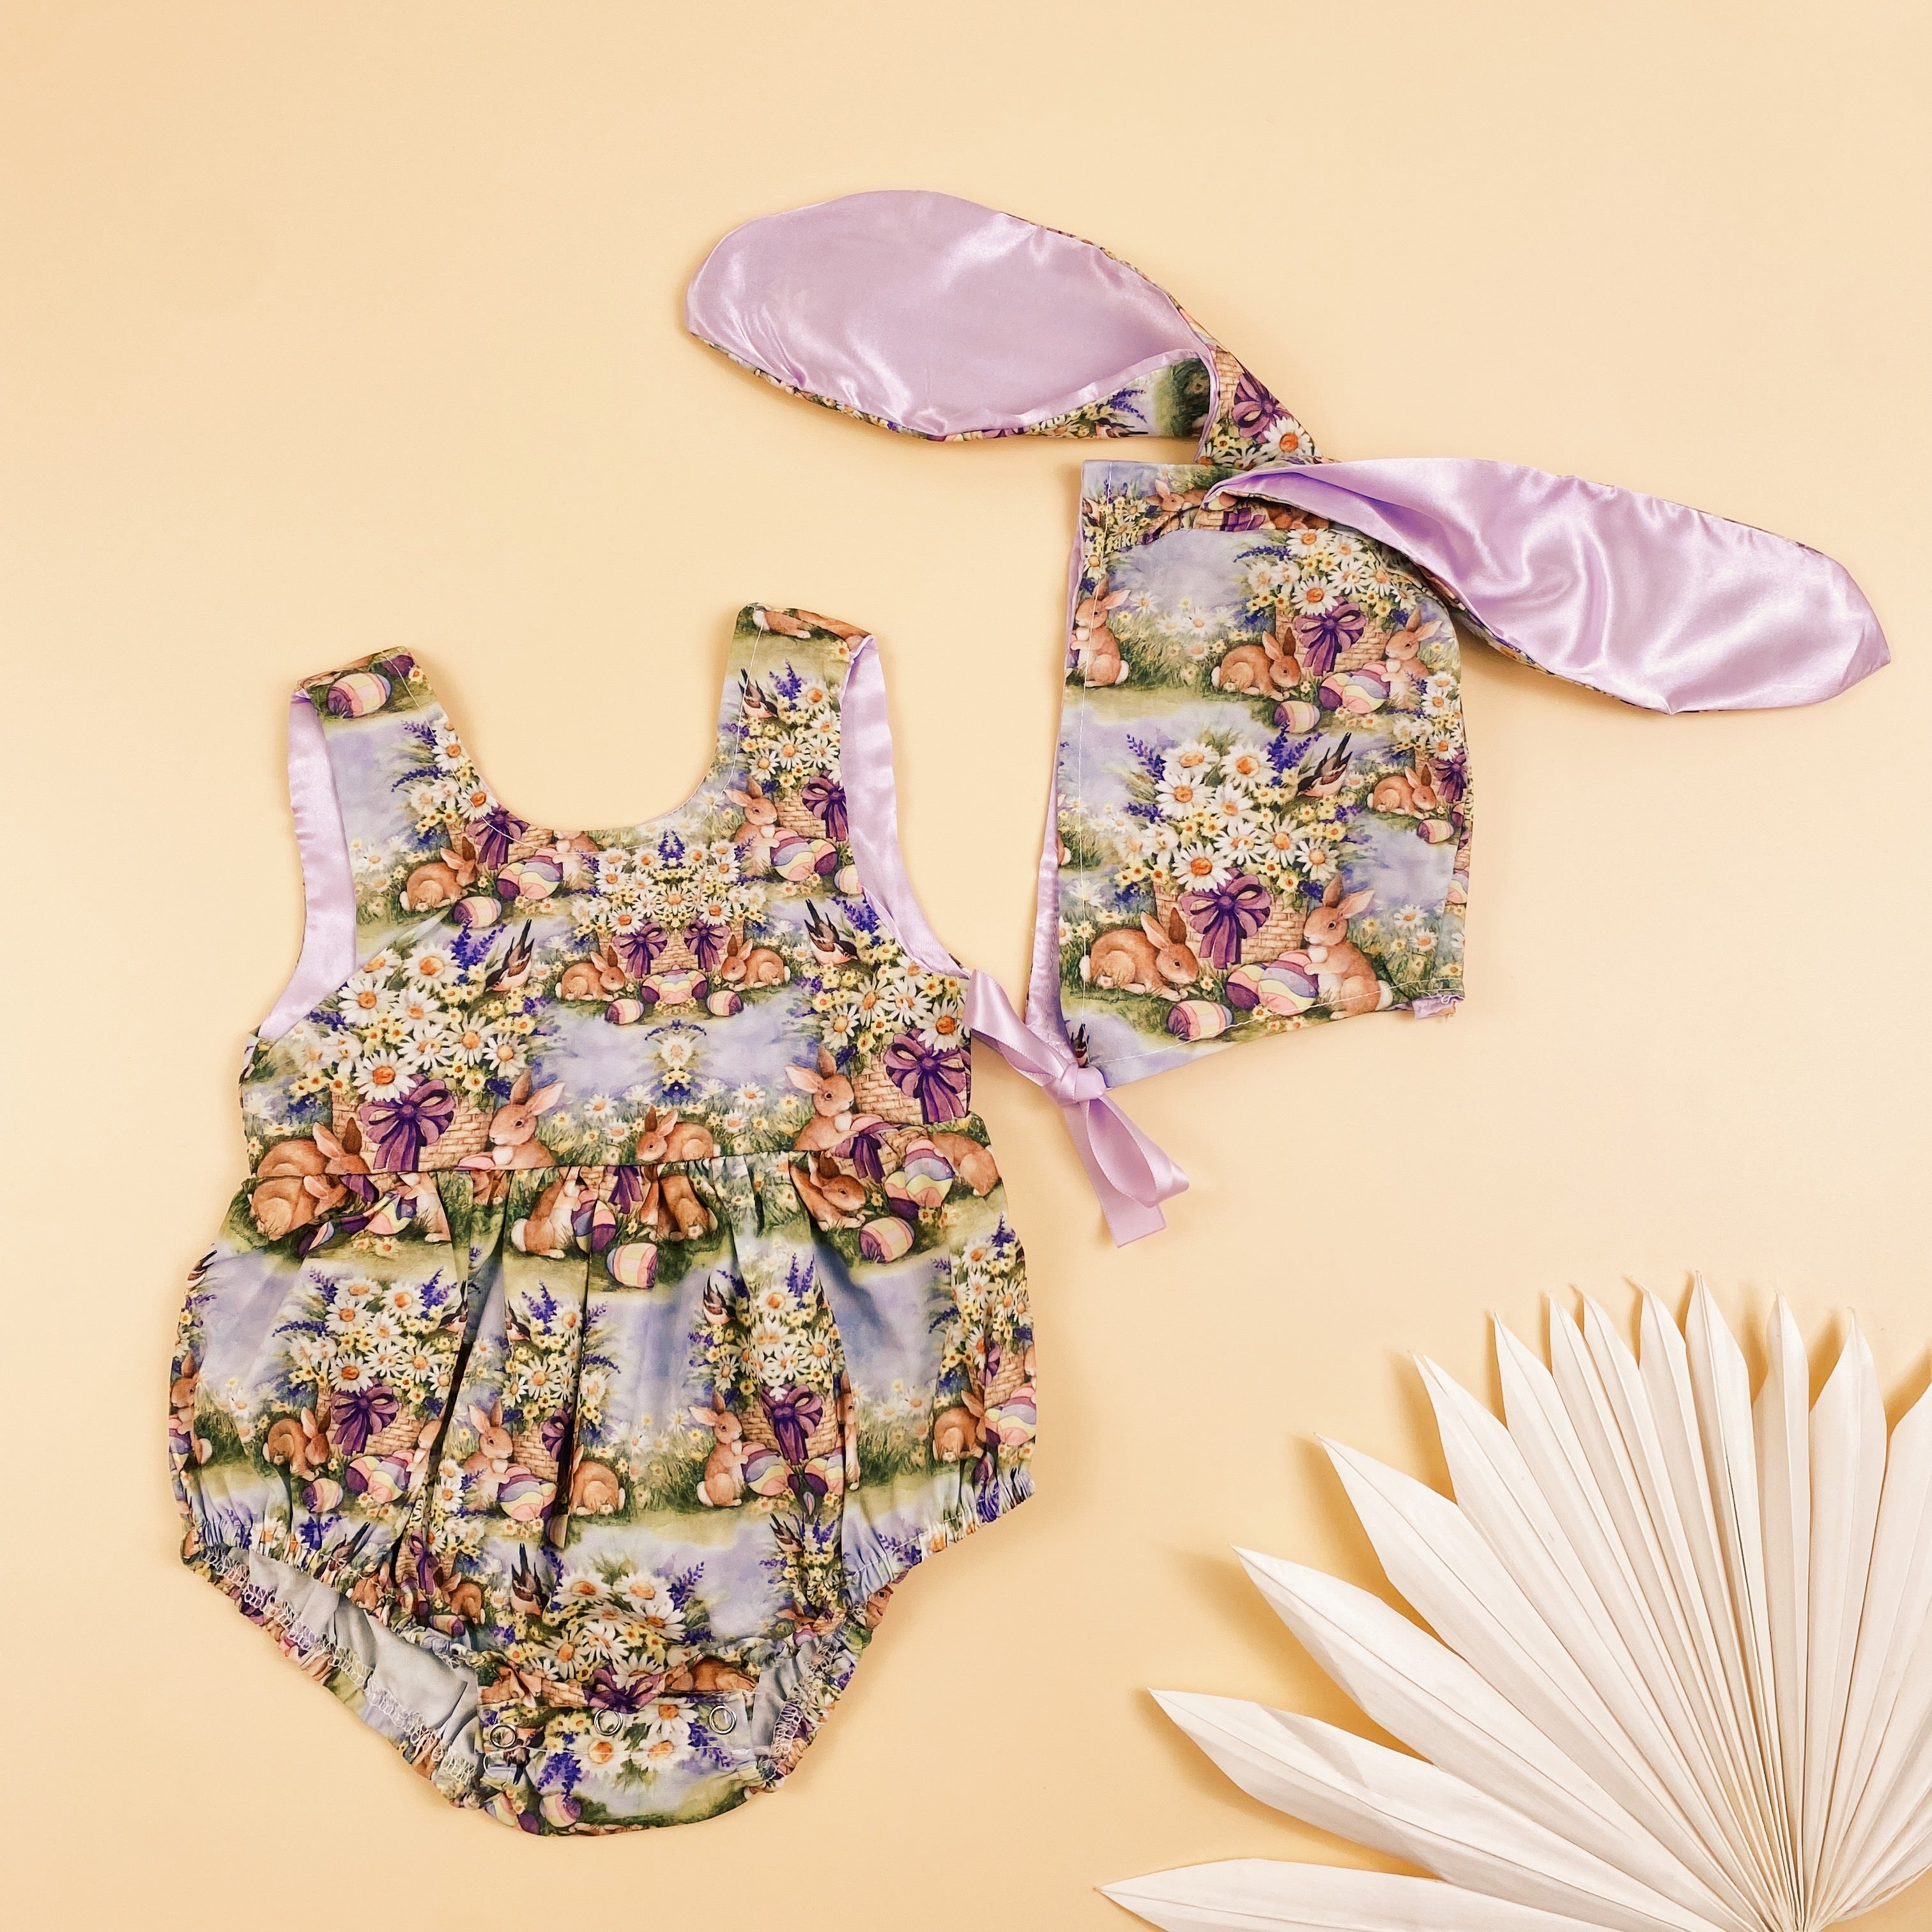 2-Piece Baby Easter Bunny Sets.